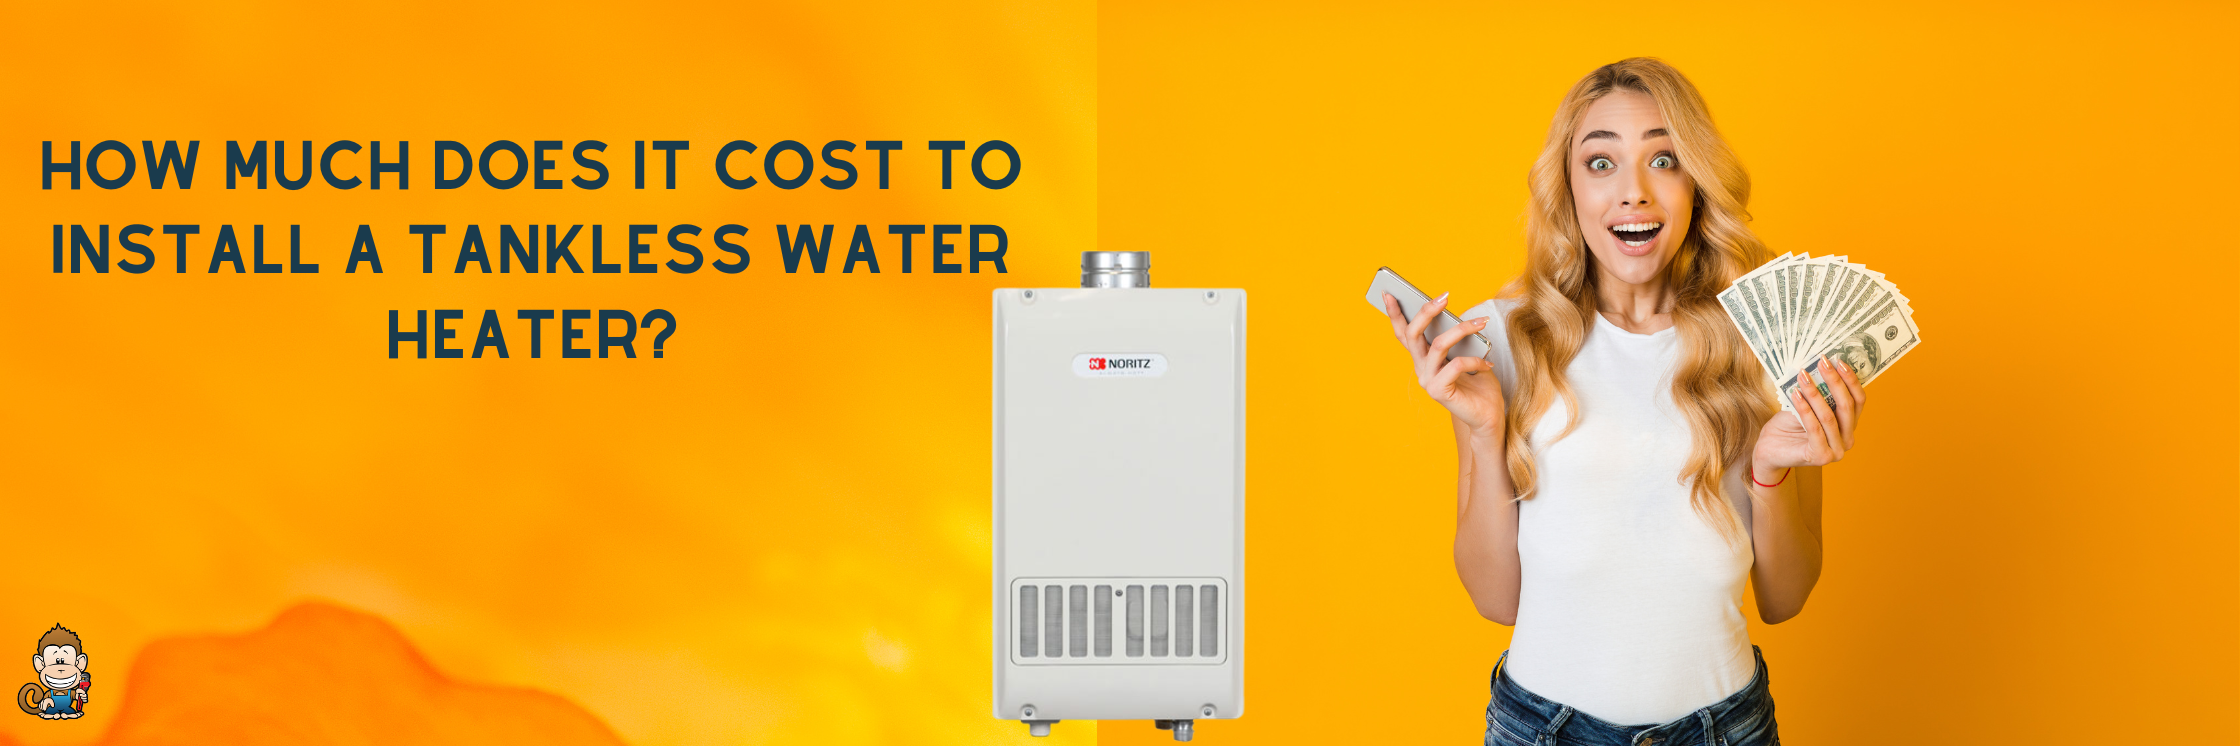 How Much Does it Cost To Install a Tankless Water Heater?